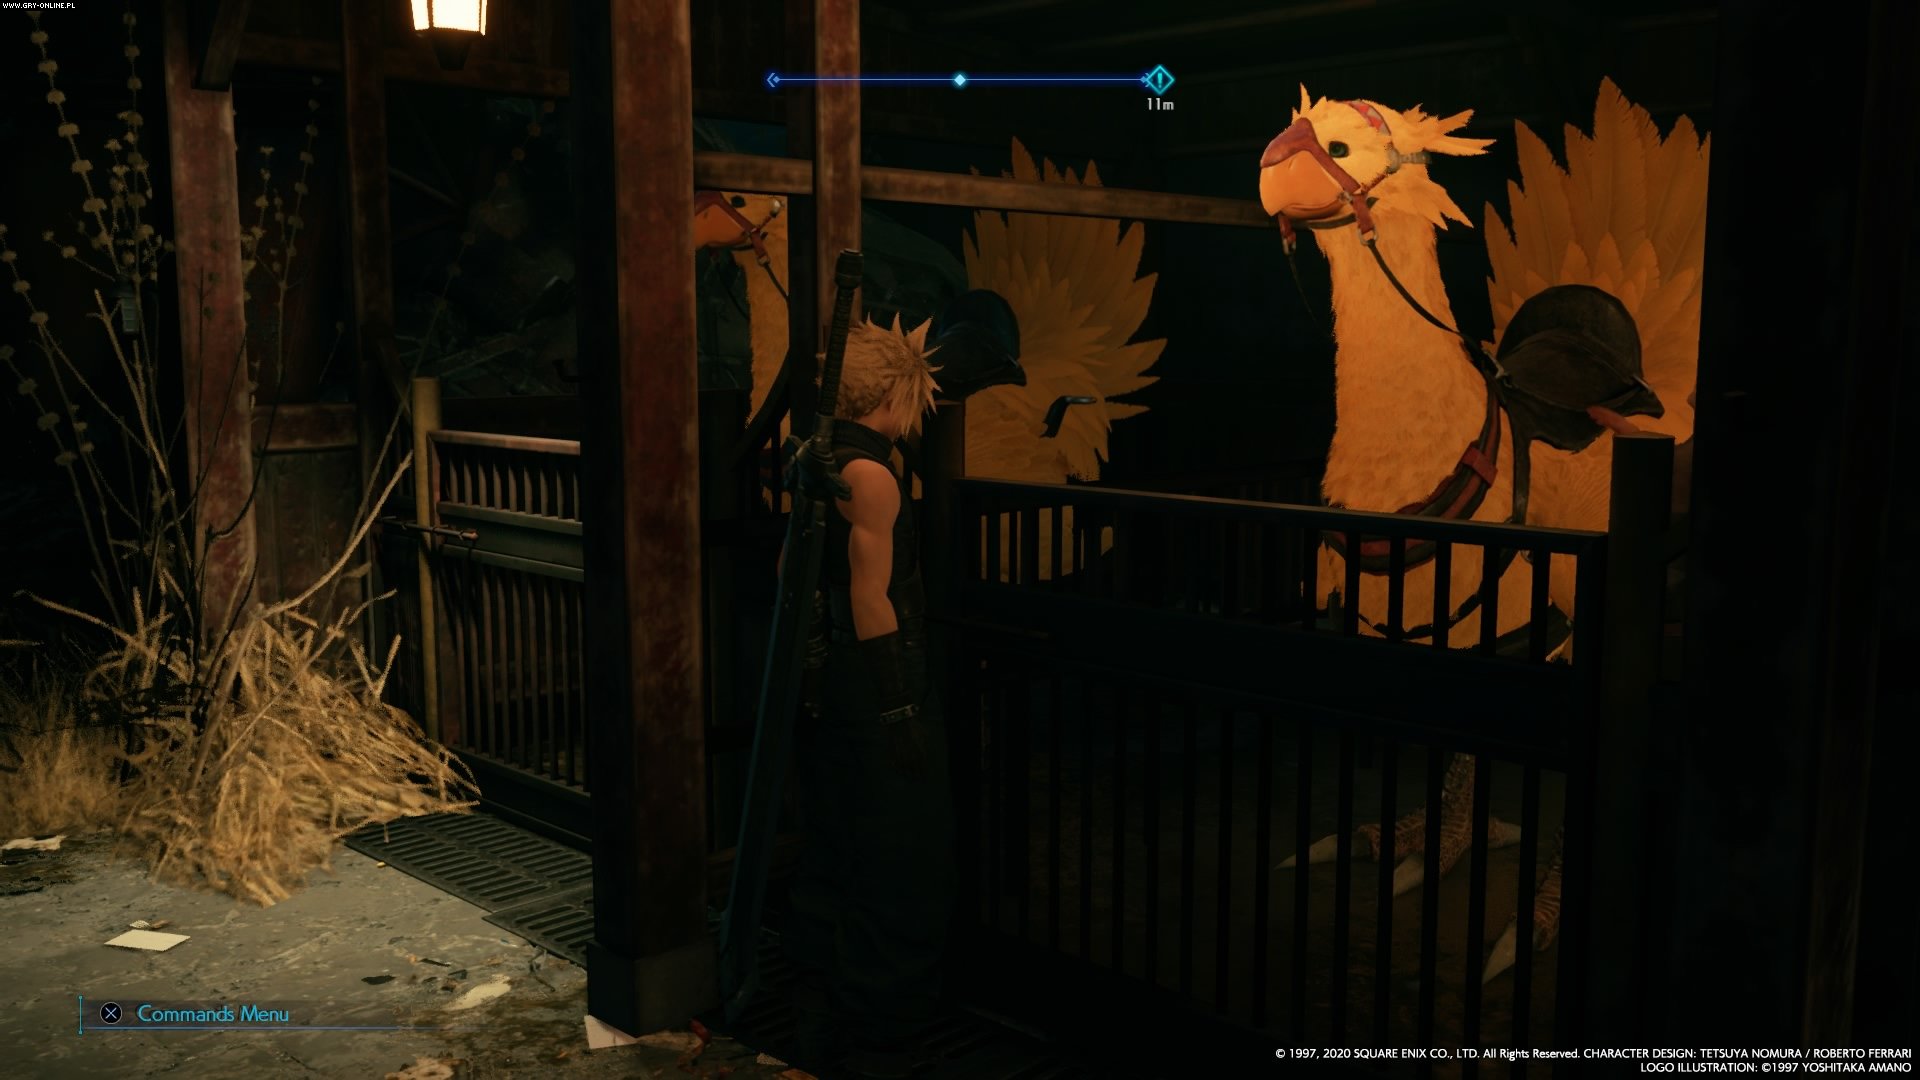 Final Fantasy 7 Remake PC Review: Ignorance is Not a Bliss